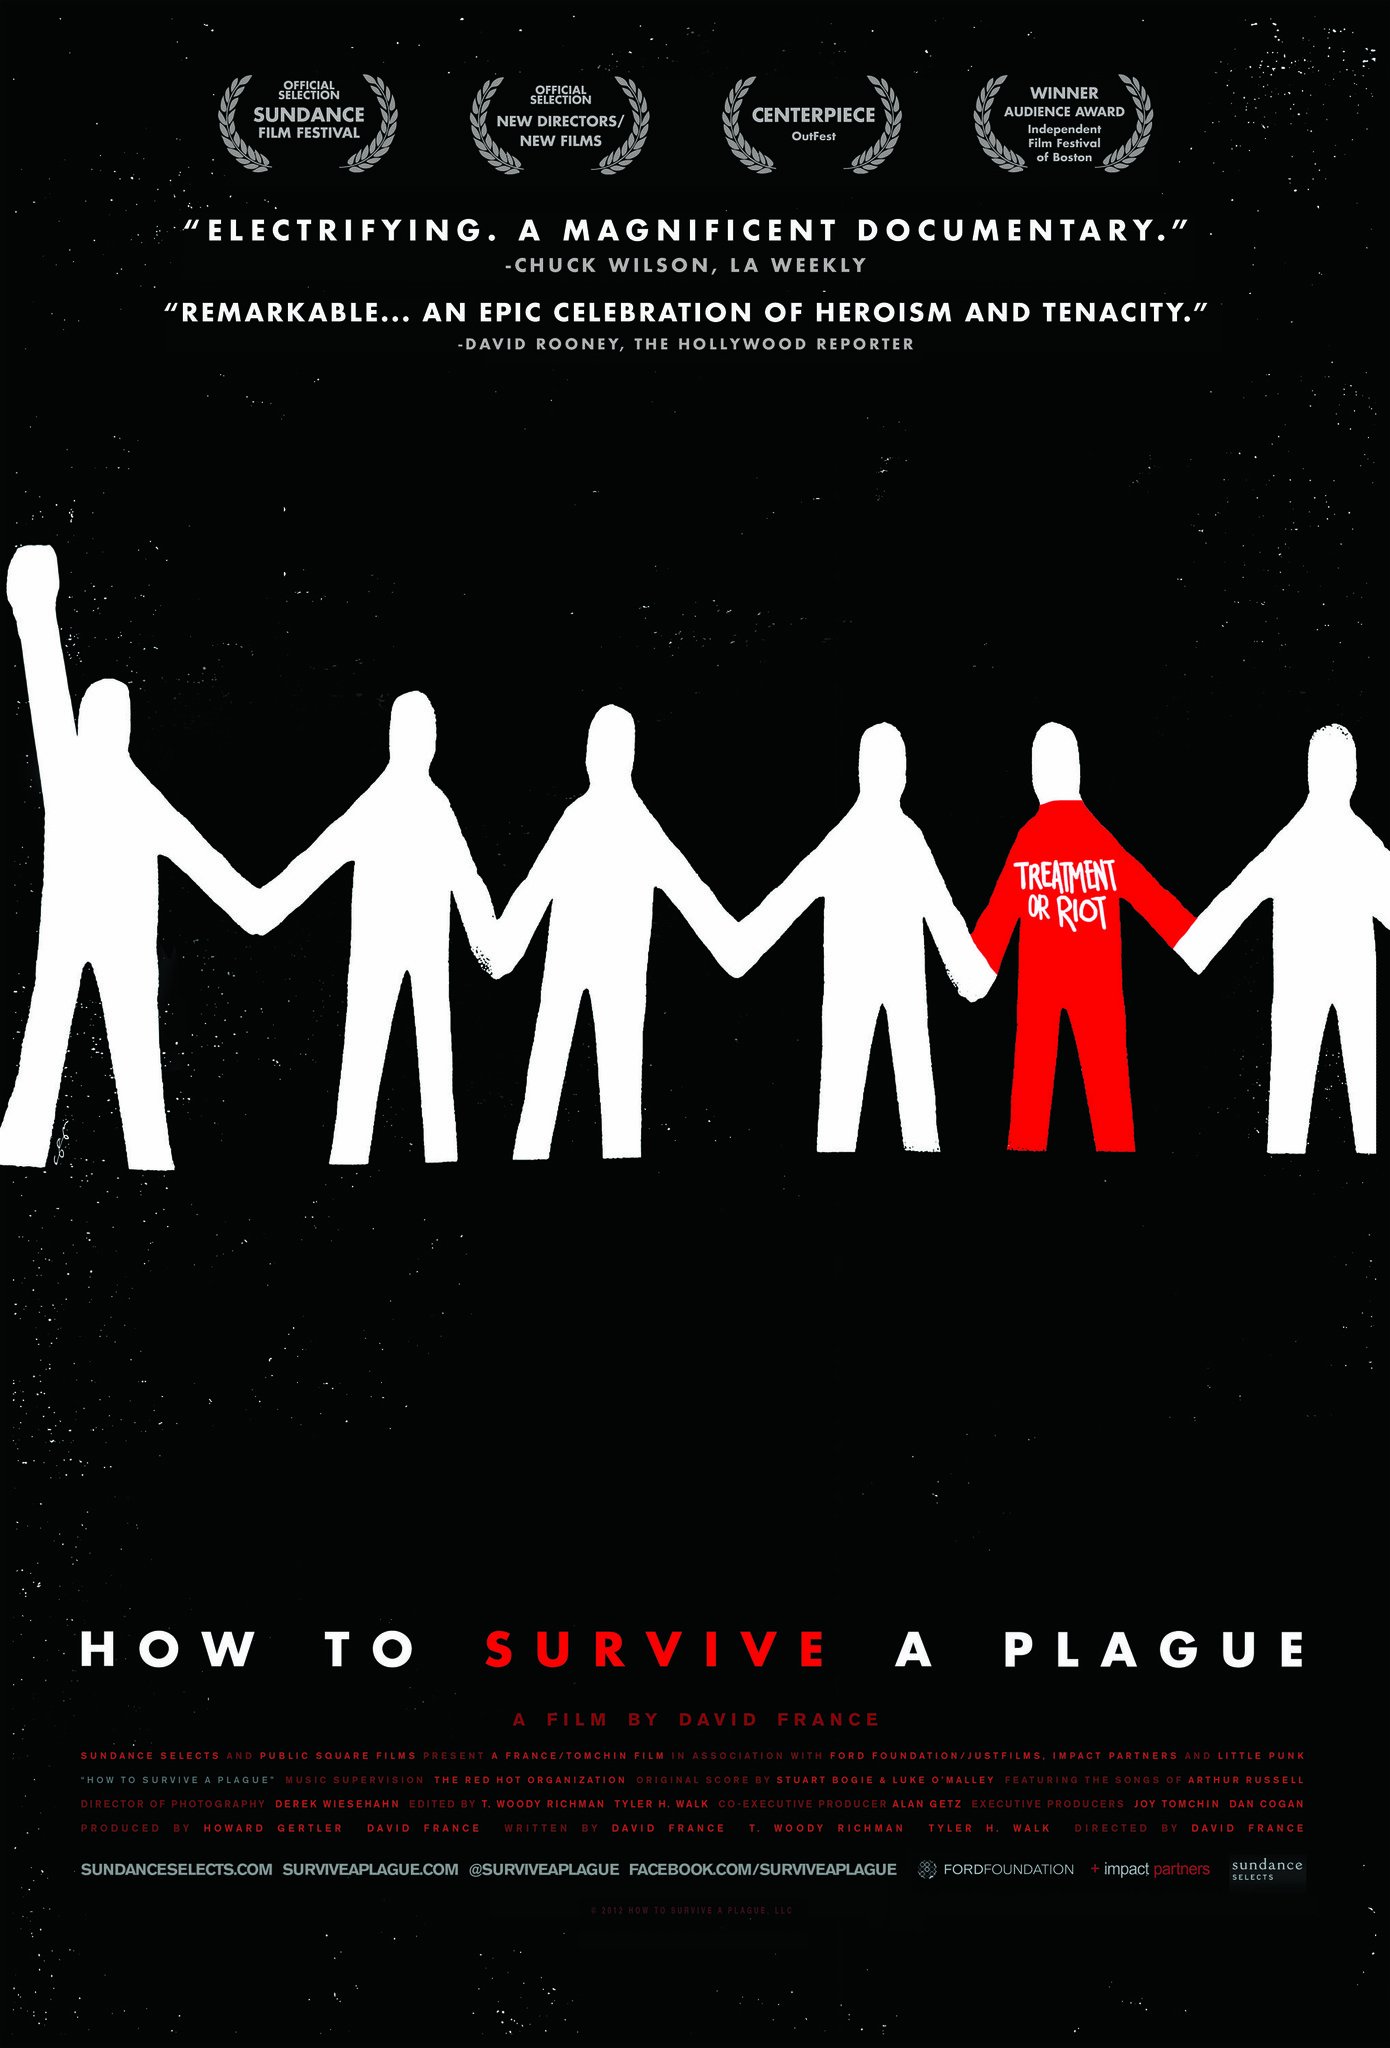 Фото - How to Survive a Plague: 1390x2048 / 215 Кб